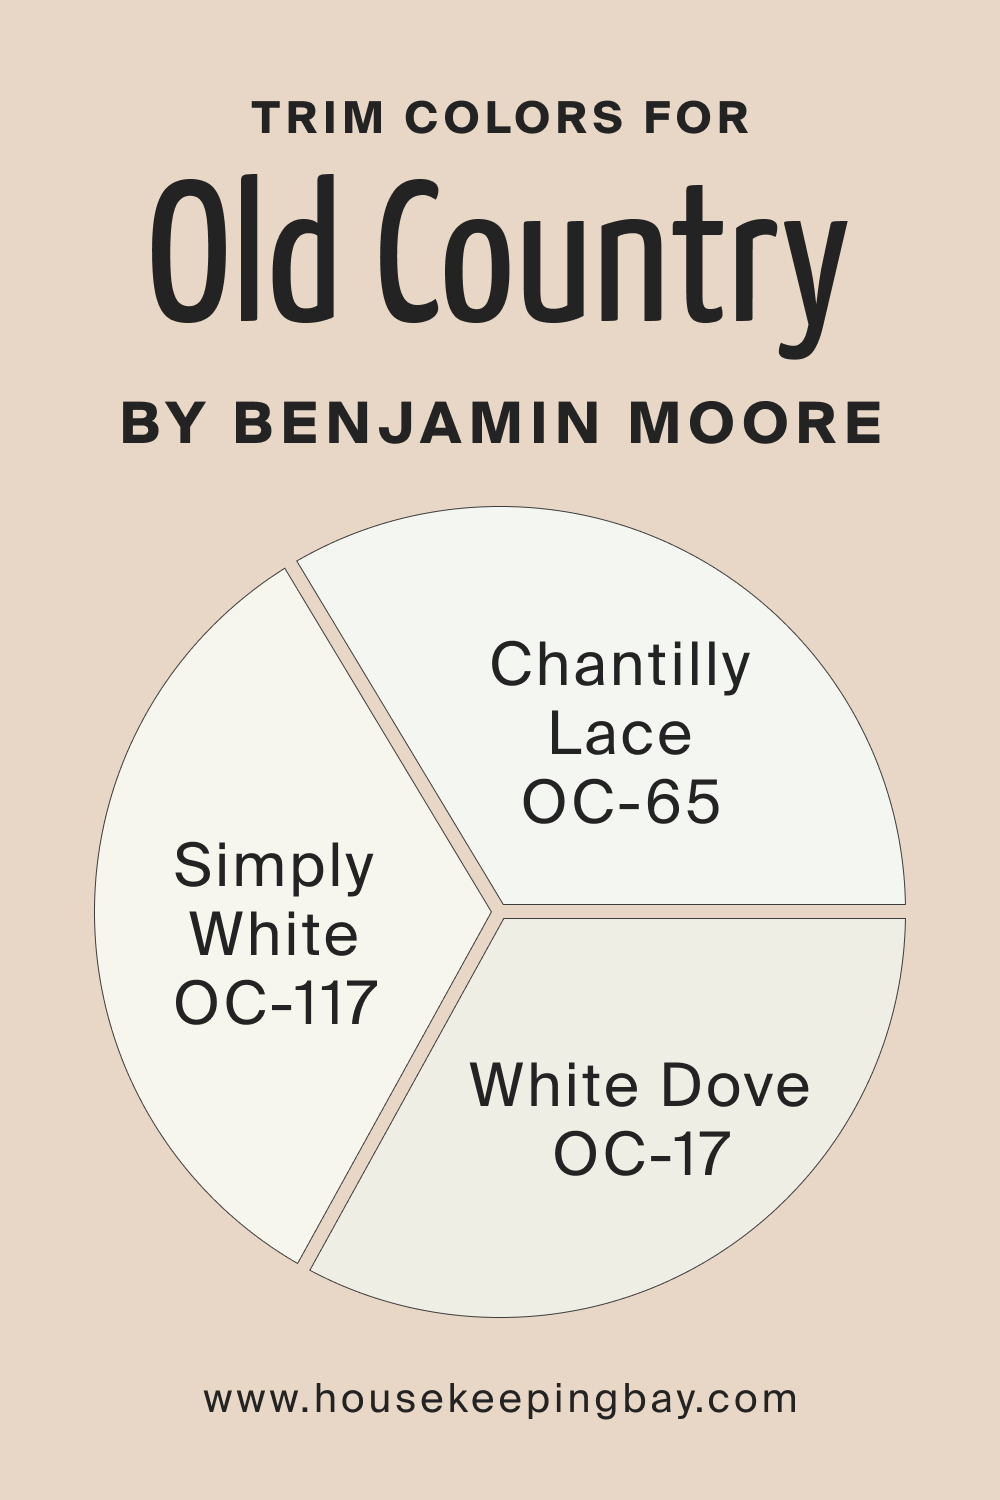 Trim Colors for Old Country OC 76 by Benjamin Moore